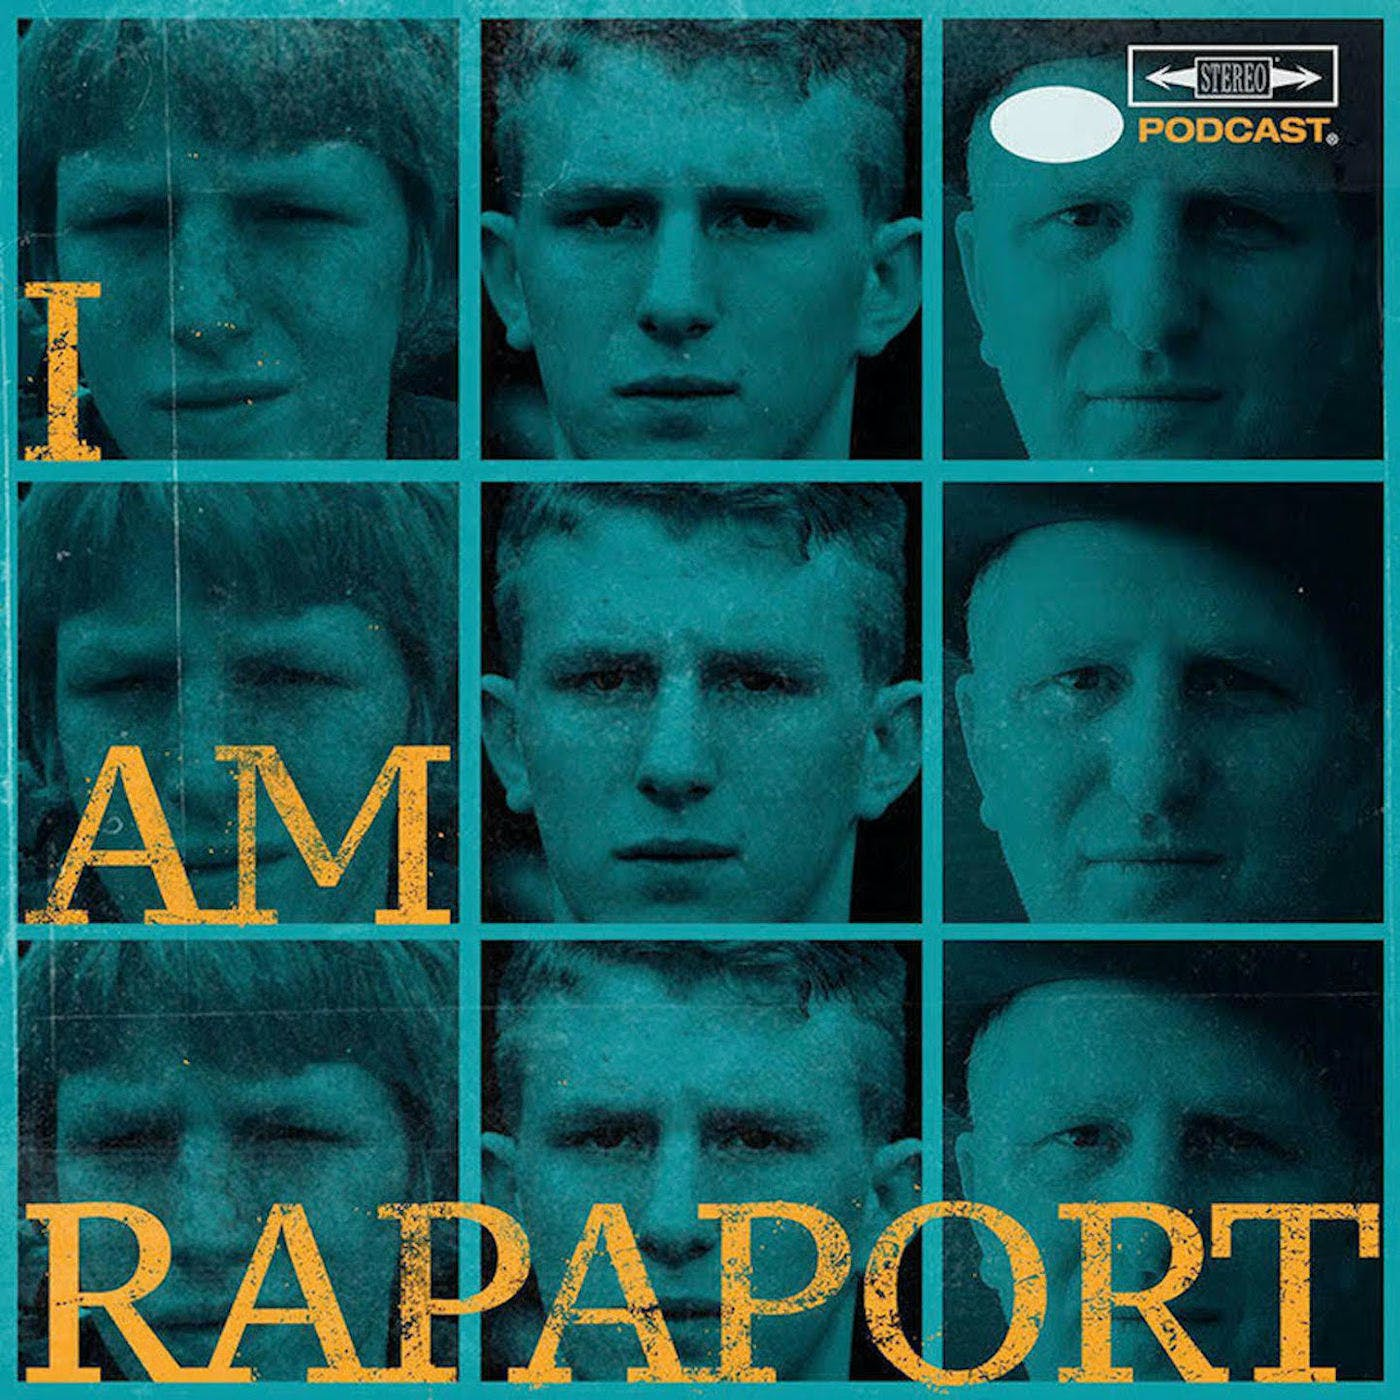 EP 210 - THE MONKEY BOWL - FANTASY FOOTBALL FOLLIES 5 - BROUGHT TO YOU BY DRAFTKINGS: www.DRAFTKINGS.com/iamrapaport